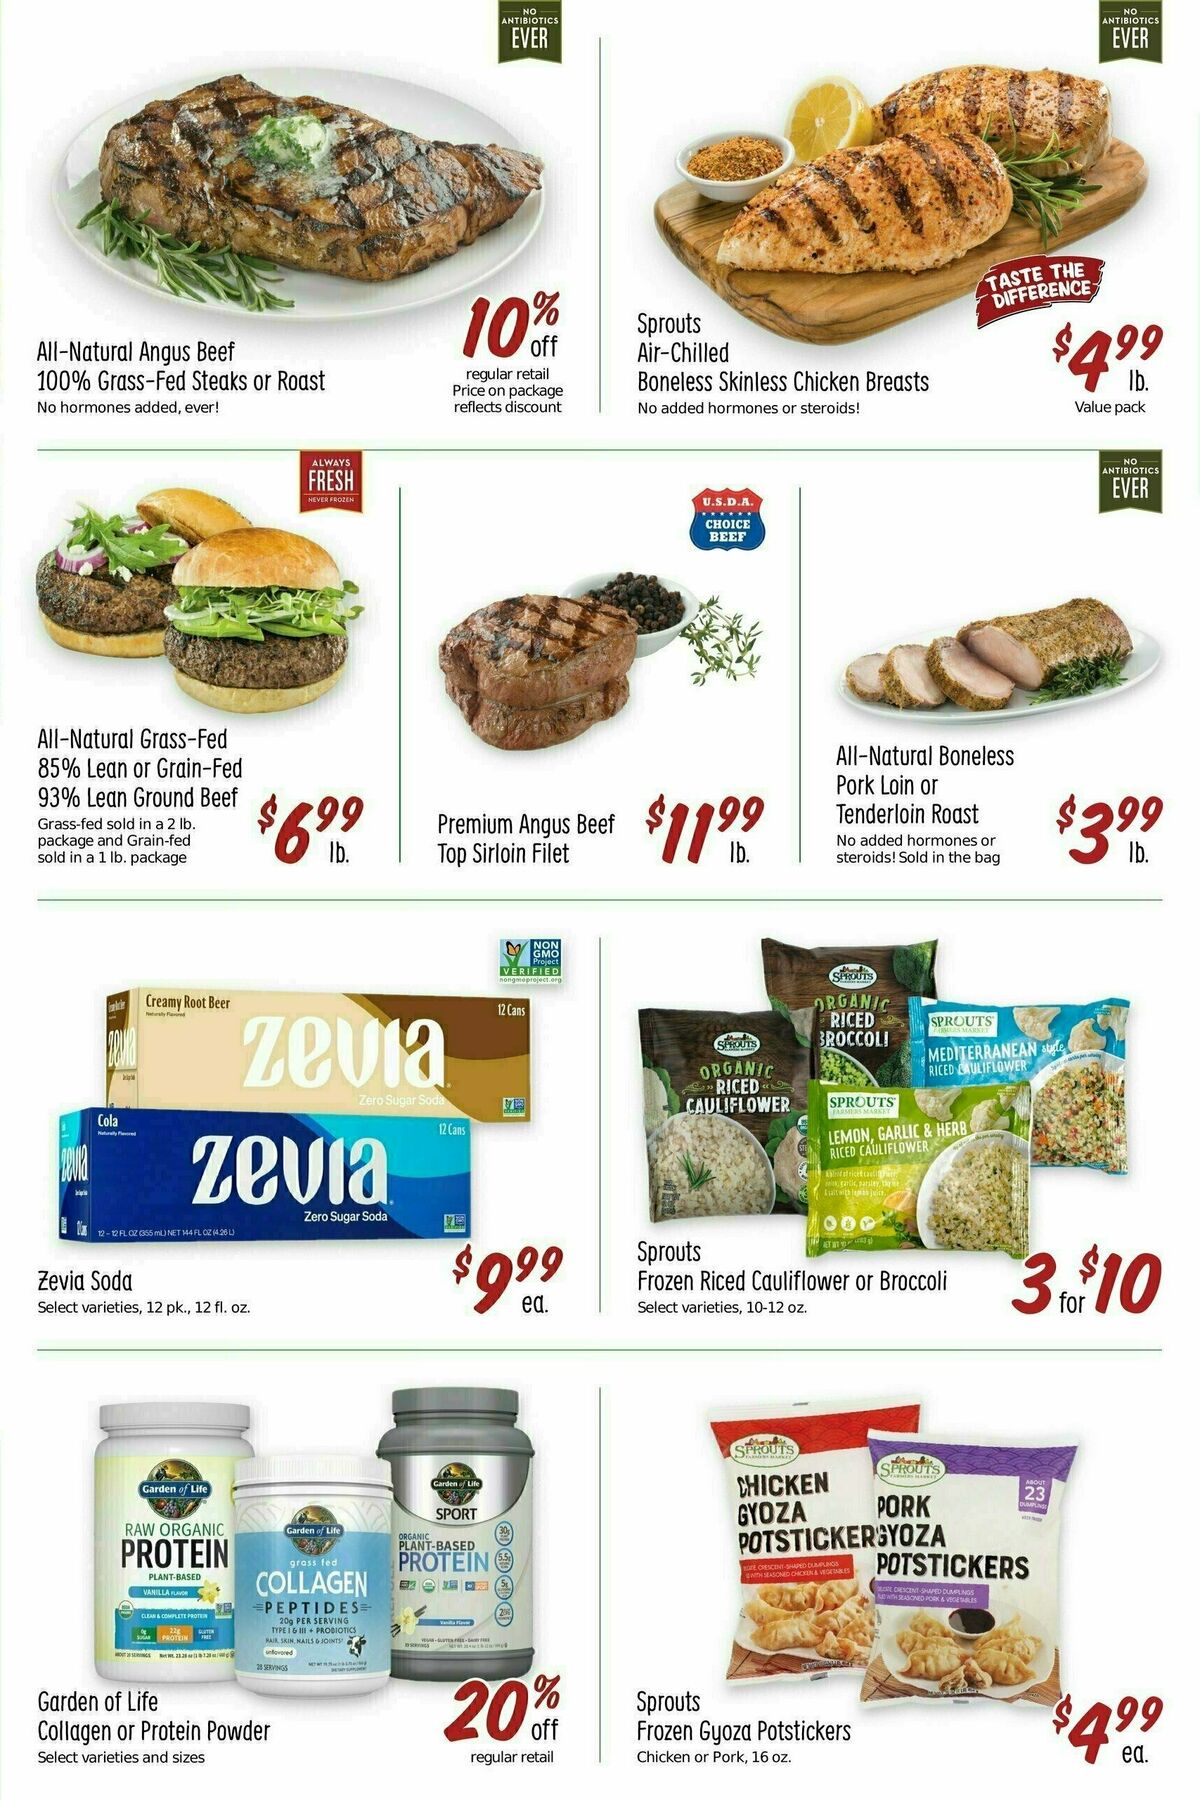 Sprouts Farmers Market Weekly Ad from October 11